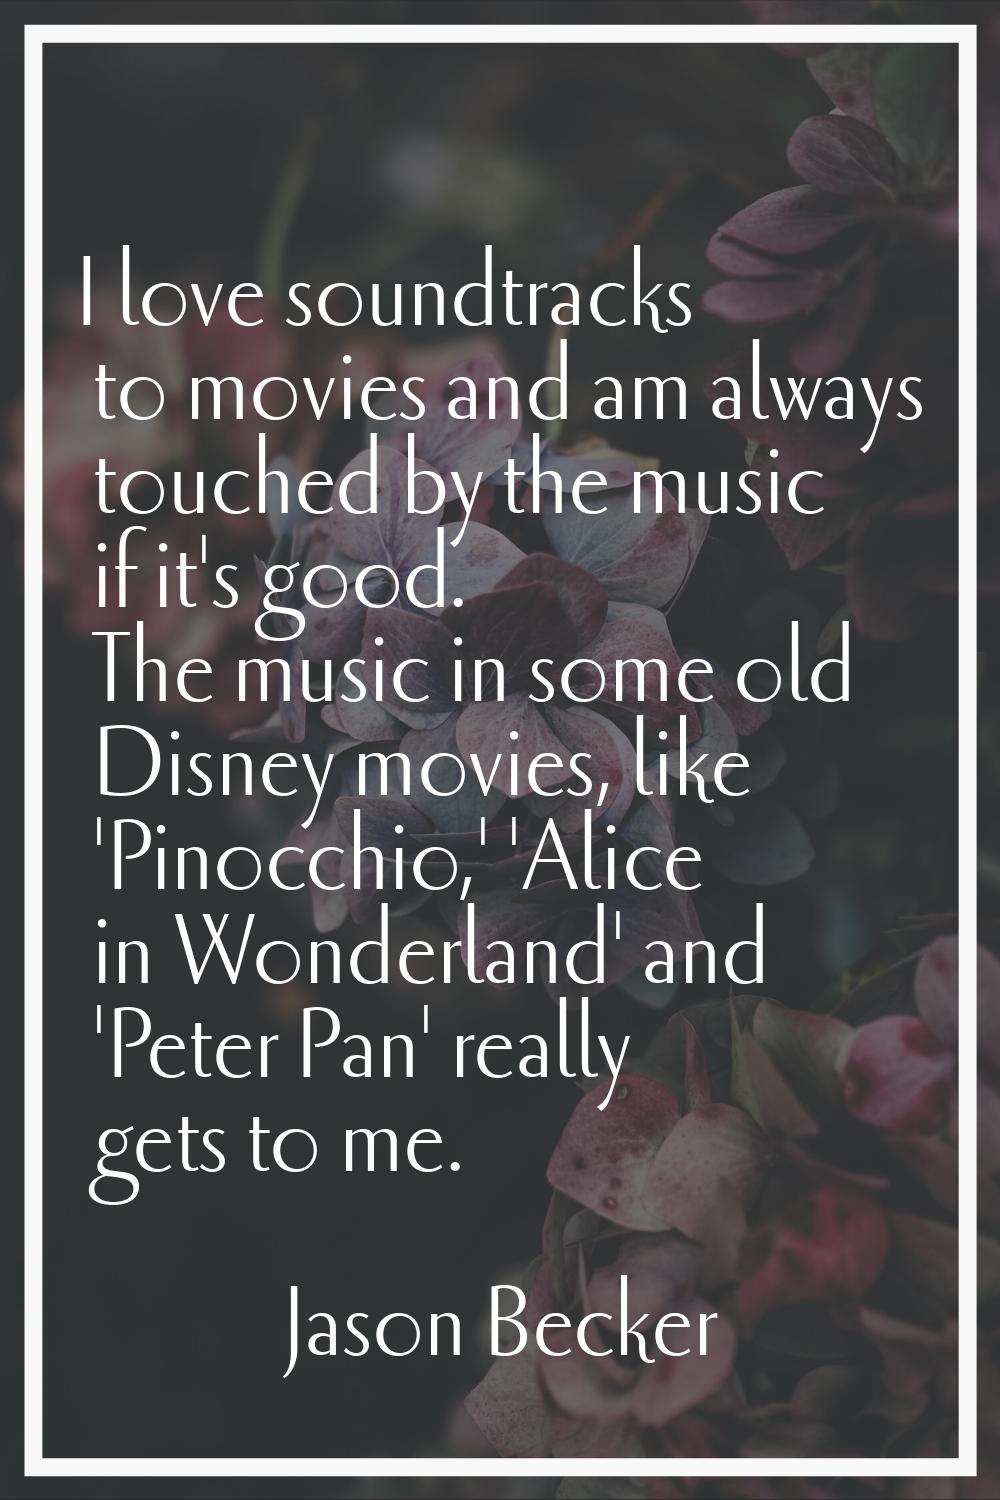 I love soundtracks to movies and am always touched by the music if it's good. The music in some old